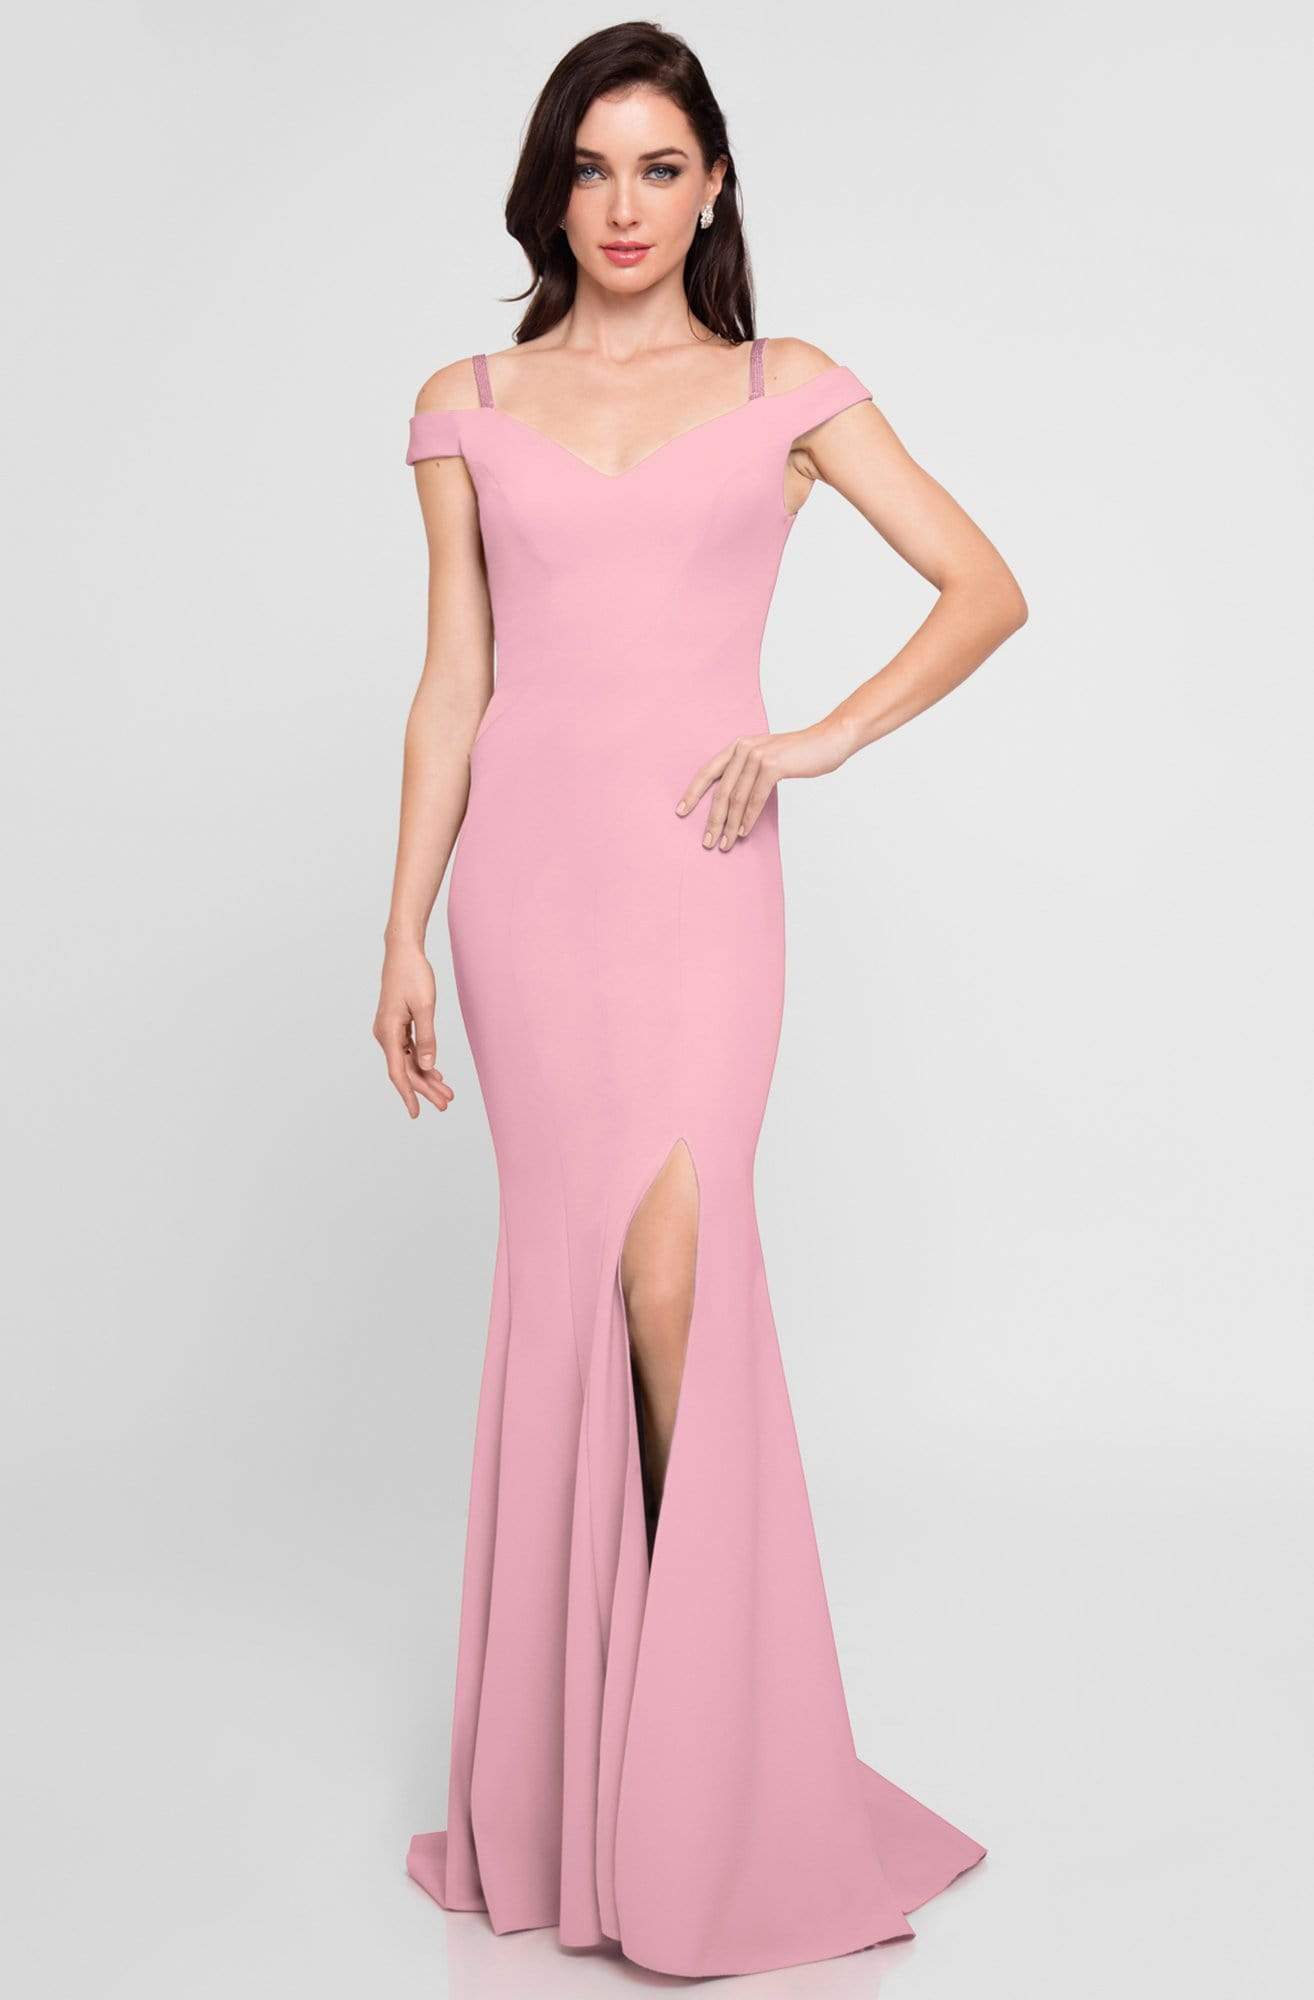 Terani Couture - 1813B5185 Sculpted Off Shoulder High Slit Sheath Gown Special Occasion Dress 00 / Blush